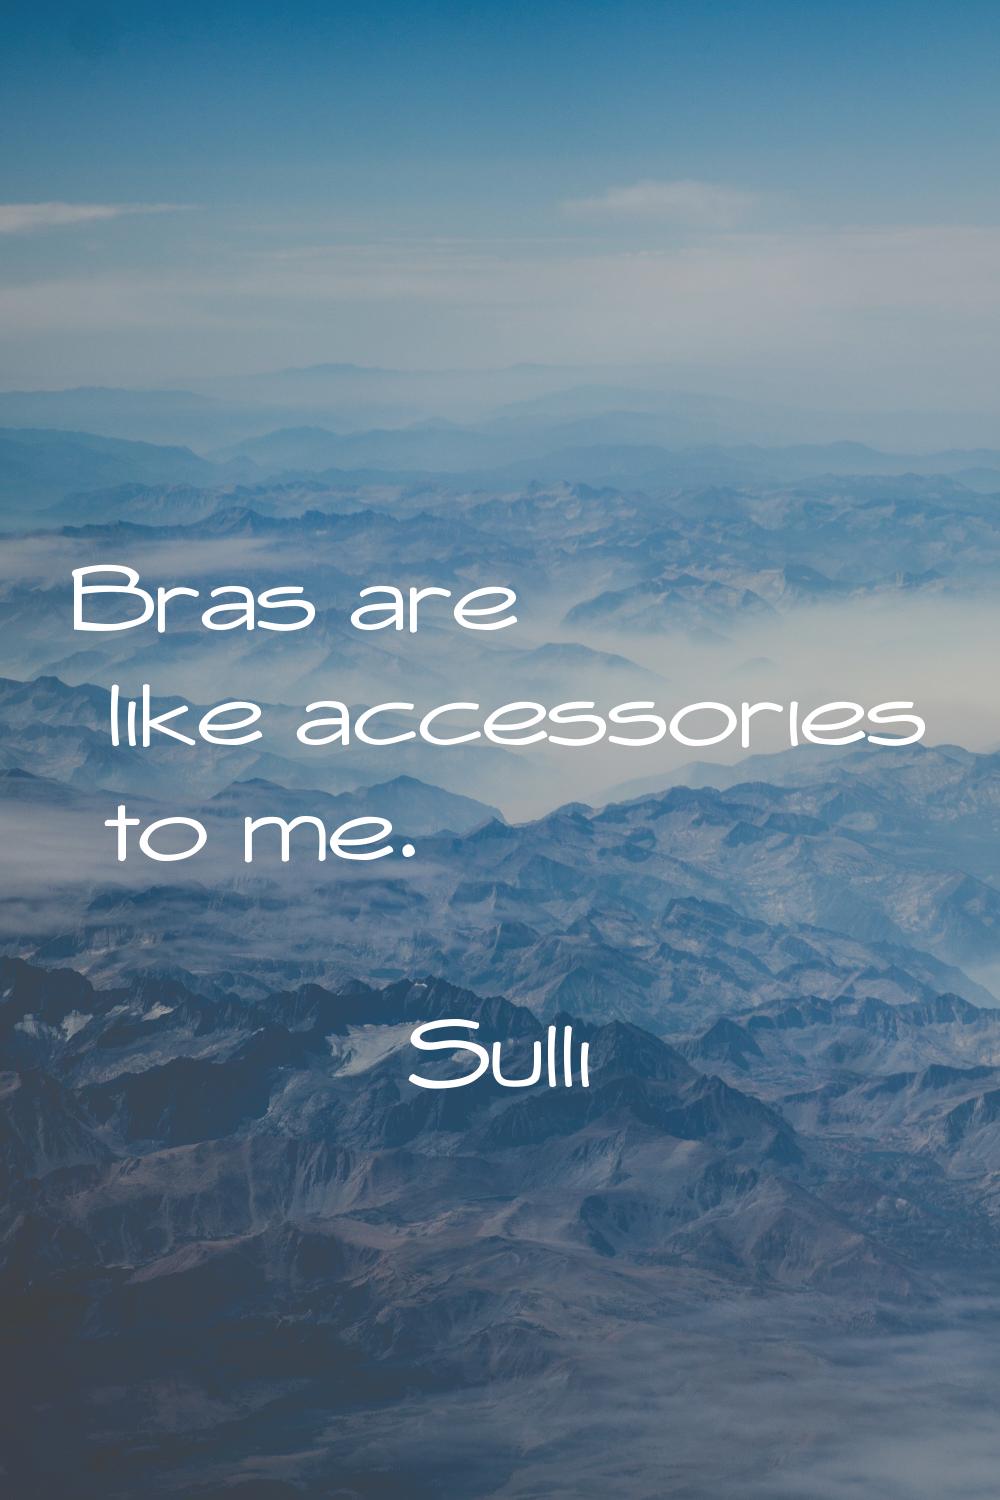 Bras are like accessories to me.